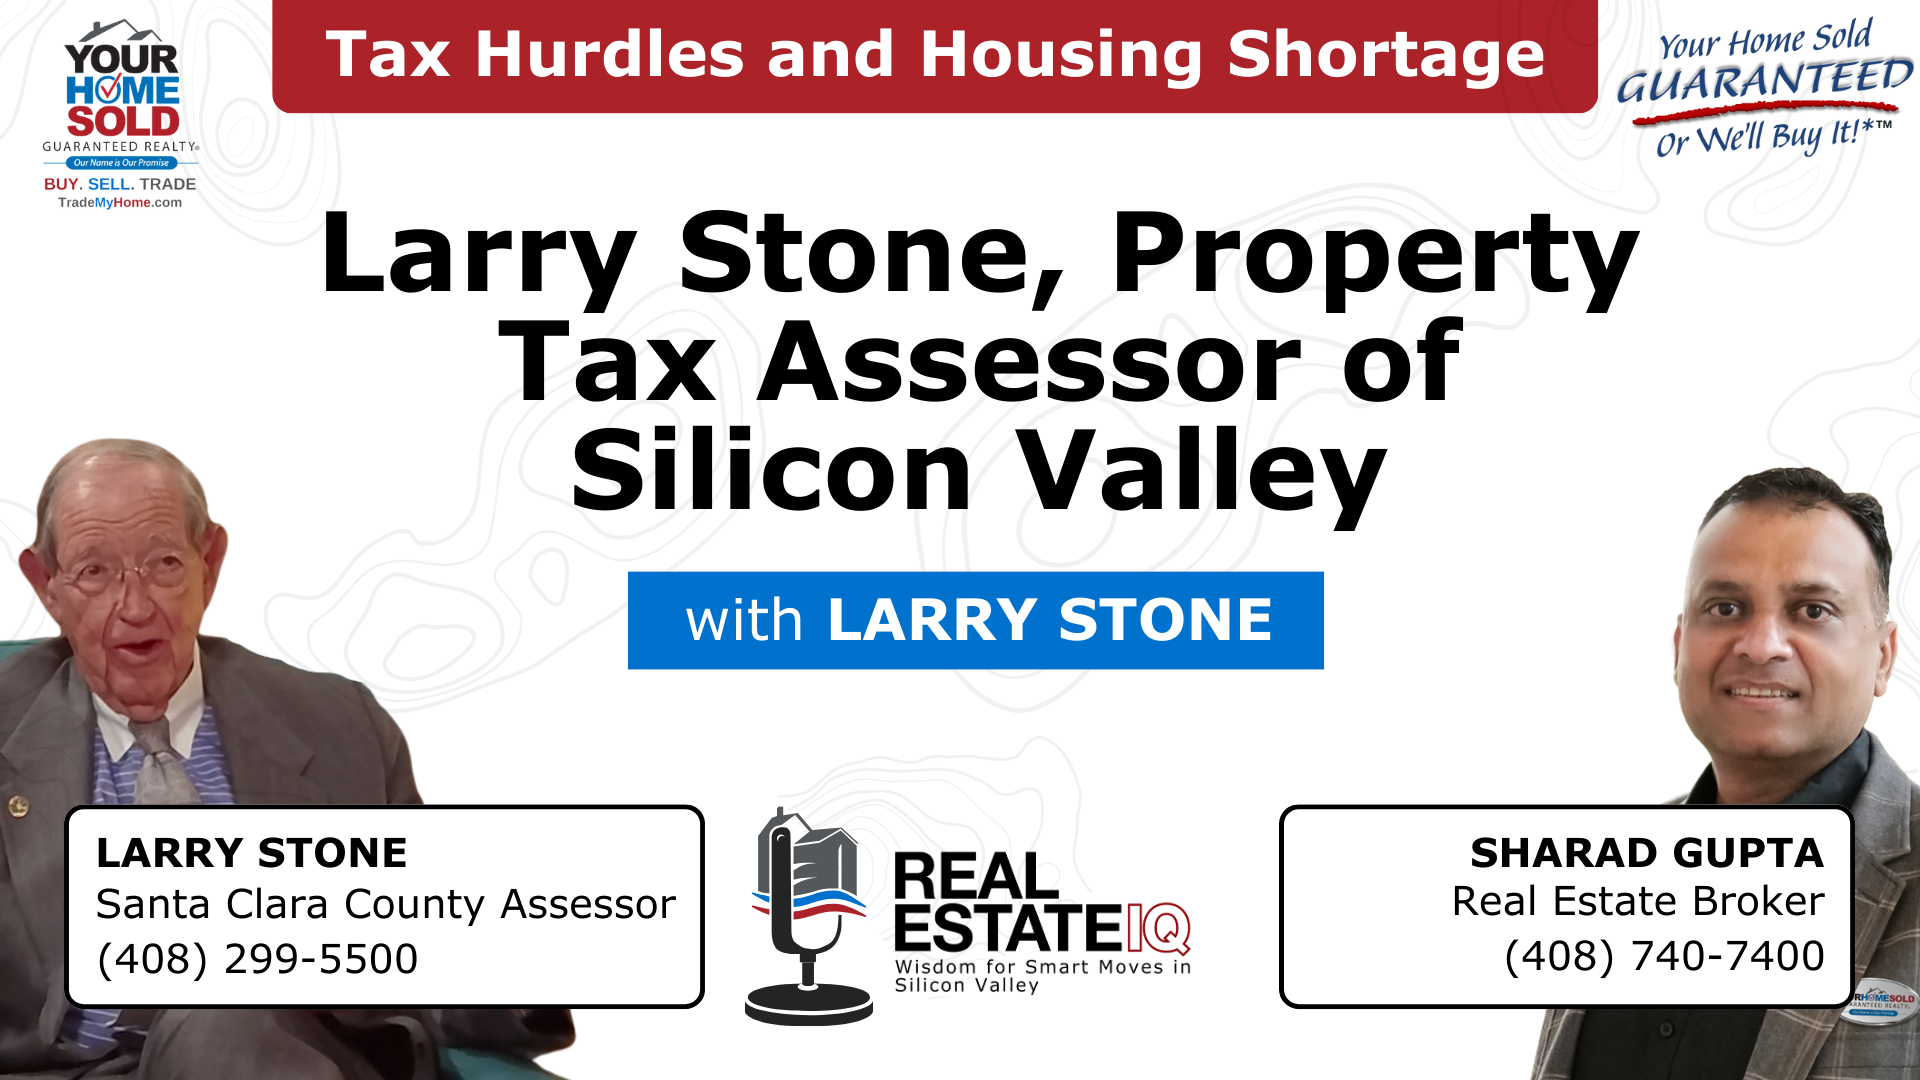 Larry Stone, Property Tax Assessor: Tax Hurdles and Housing Shortage of Silicon Valley